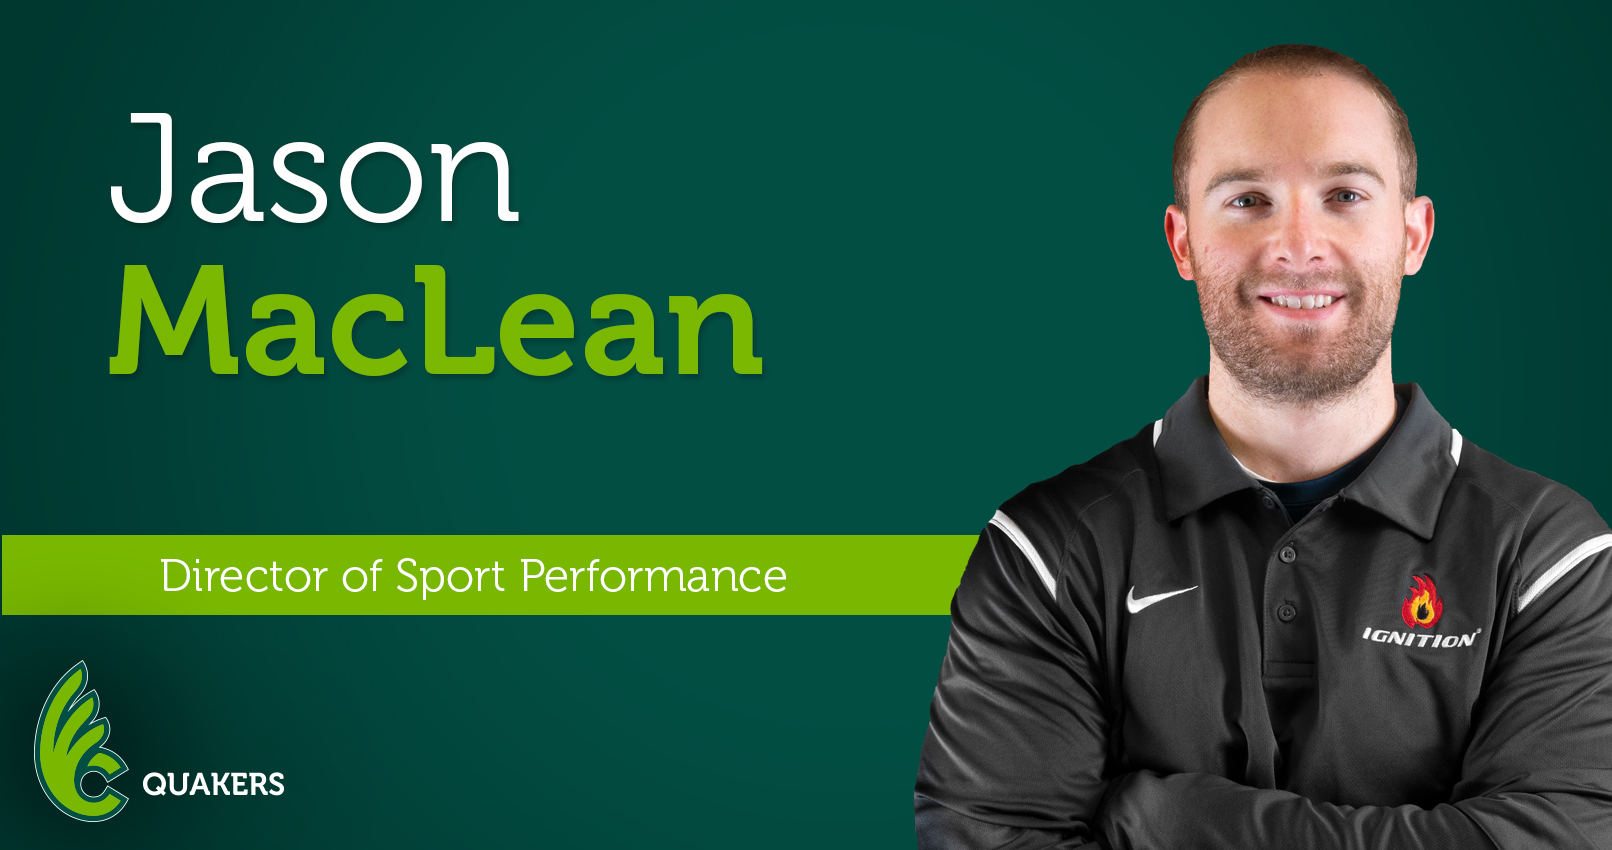 Jason MacLean Hired as New Director of Sport Performance